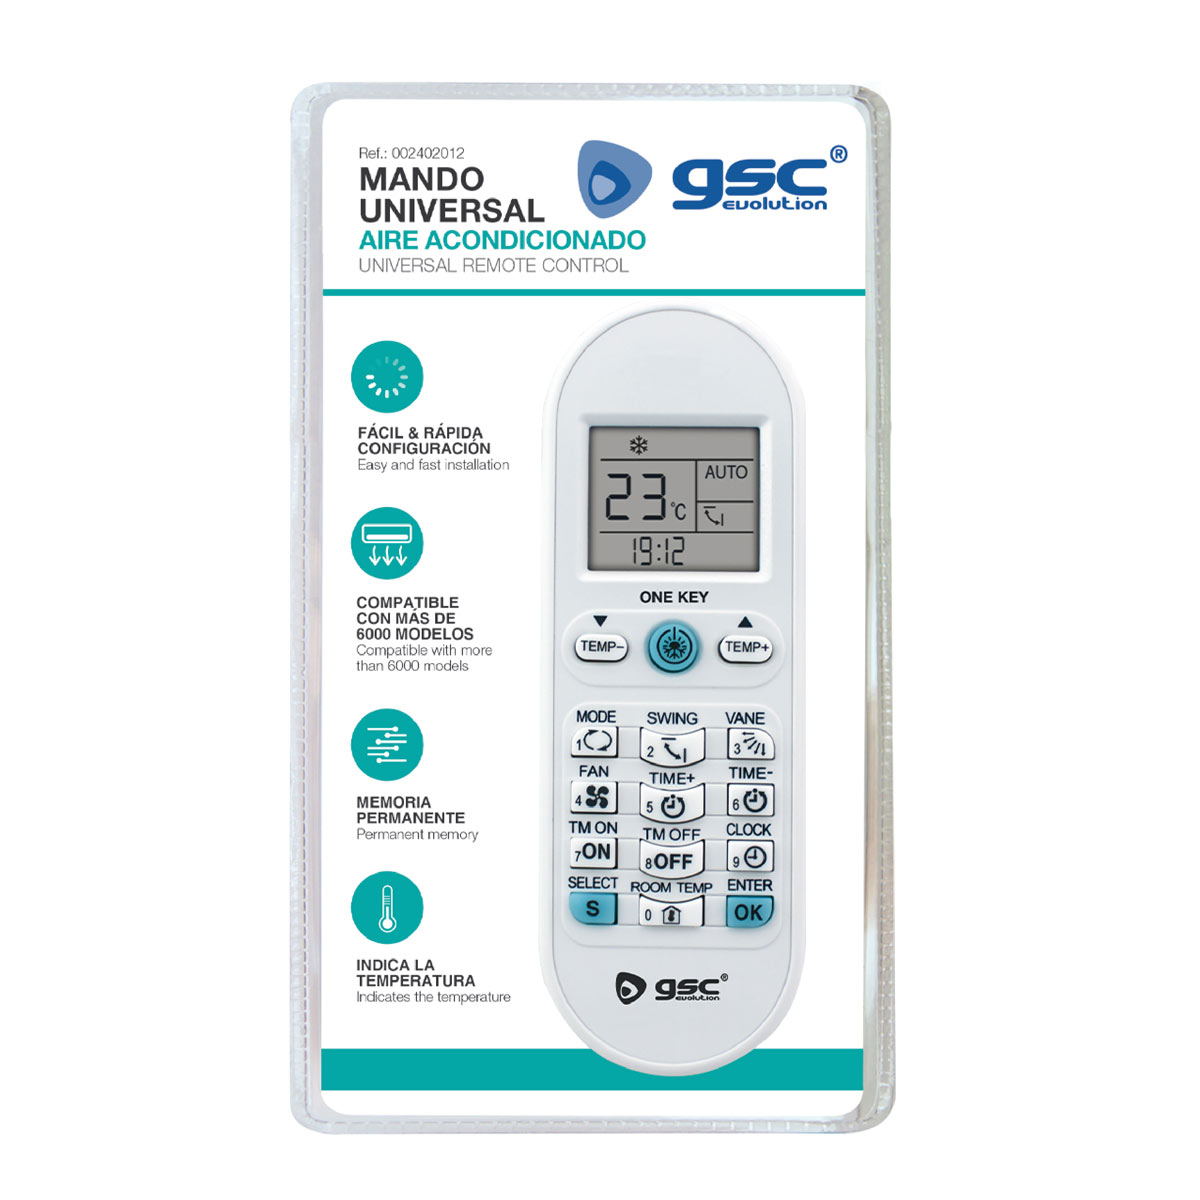 Universal remote for air conditioning